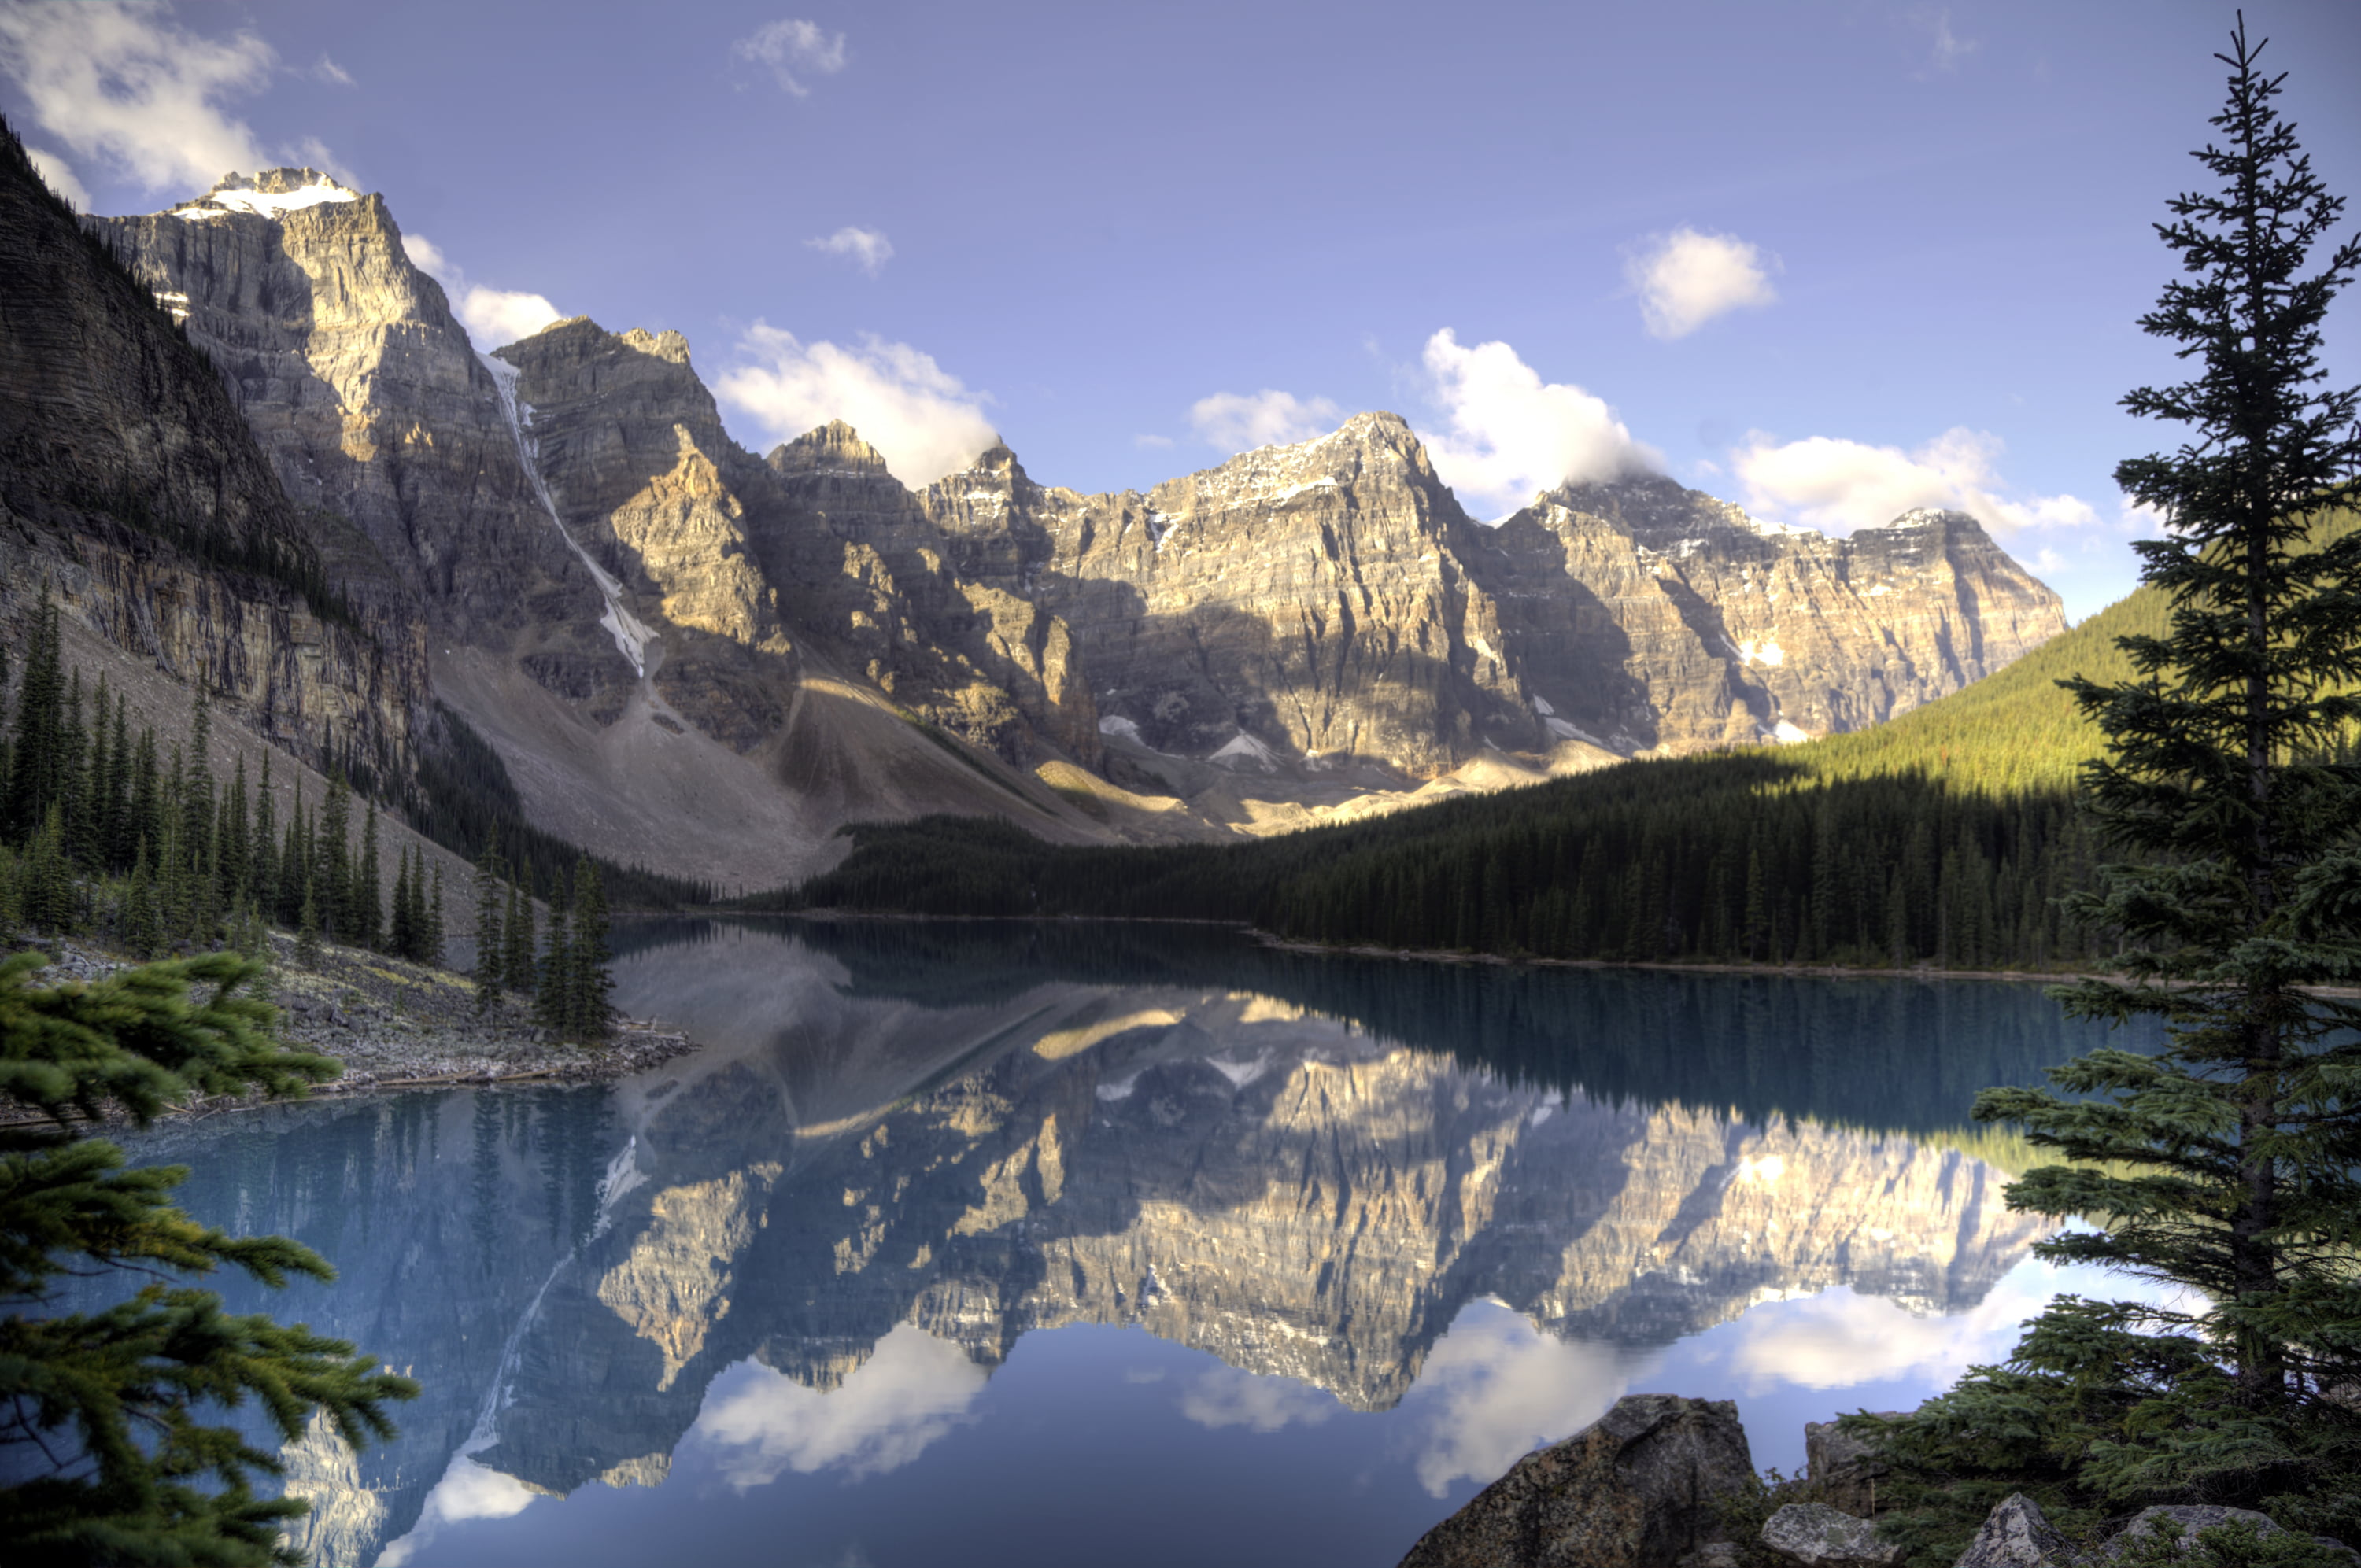 body of water surrounded by trees and mountain, moraine lake